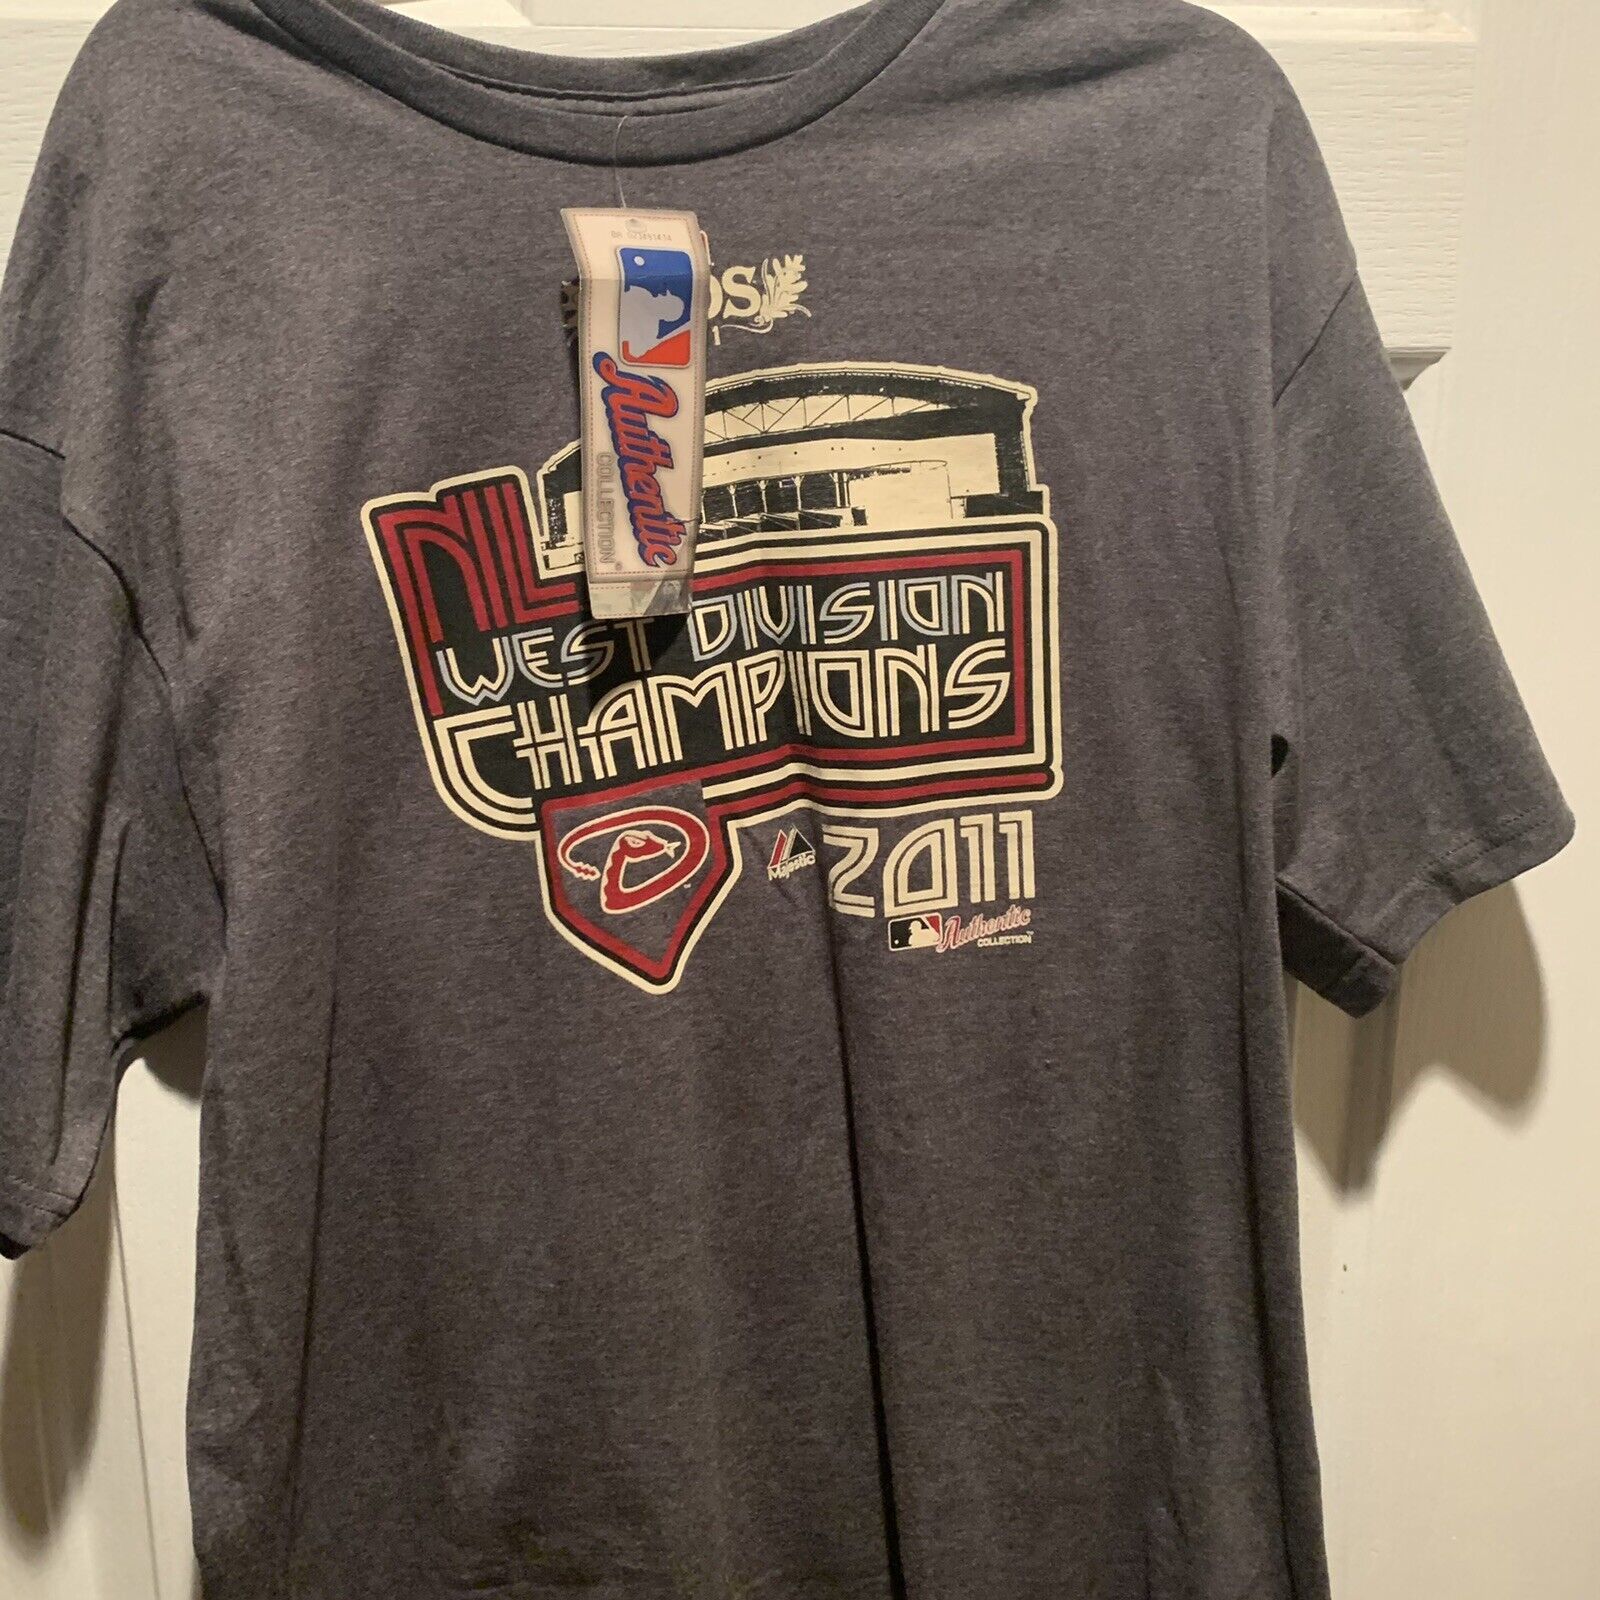 Primary image for Authentic Majestic 2011 West Division Champions T-Shirt XL Gray #47-0342